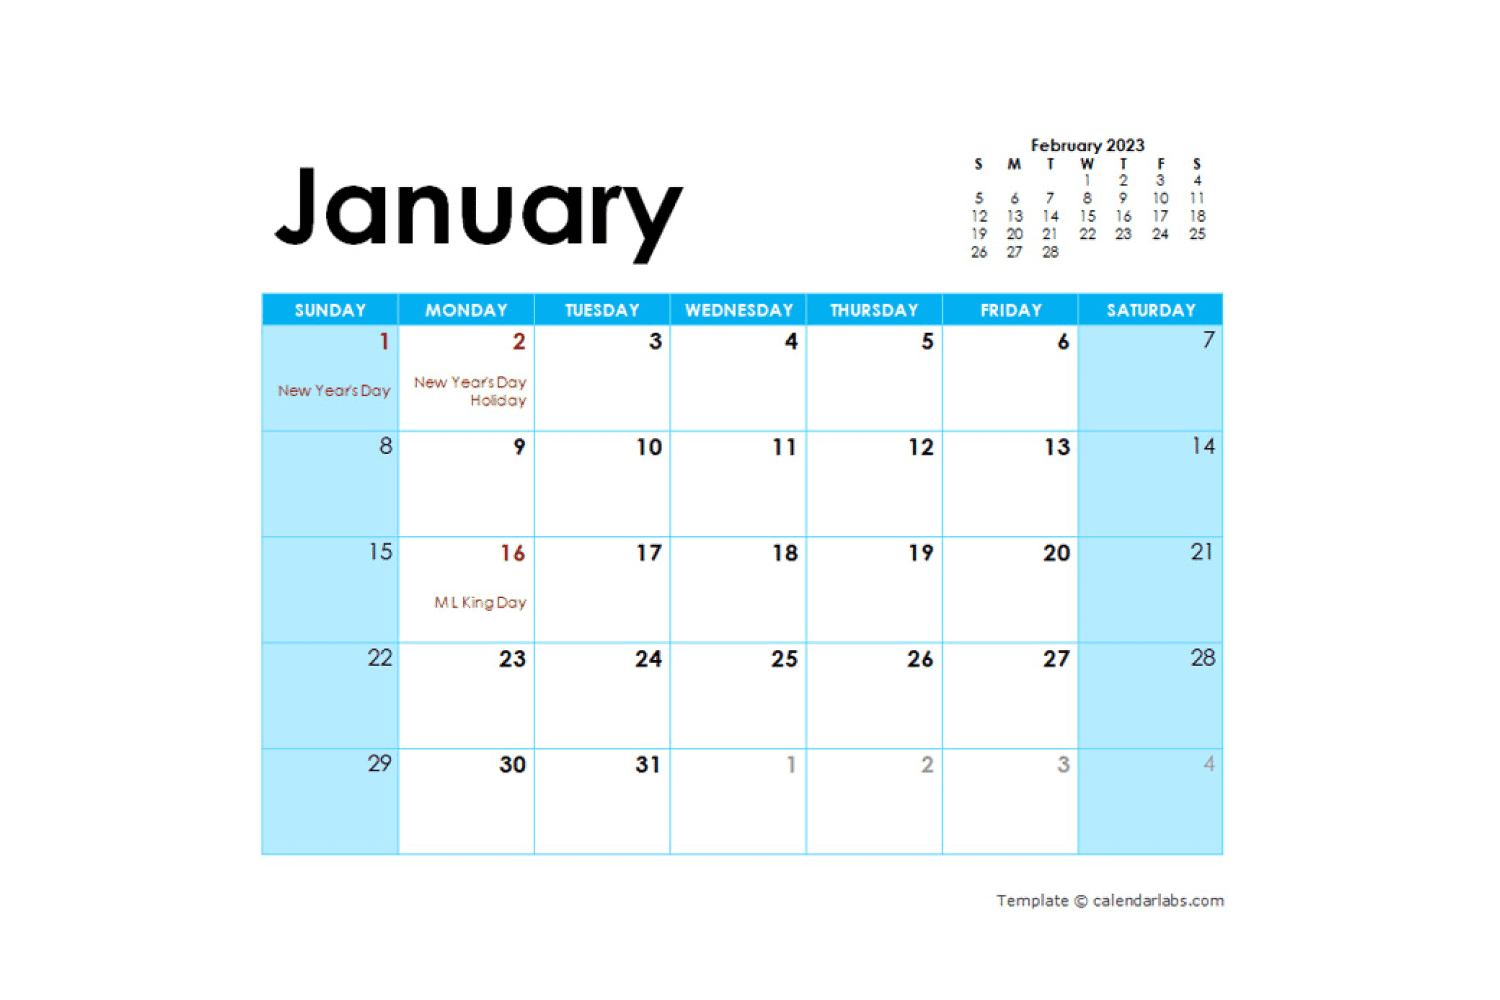 January calendar with blue color palette and plenty of space.